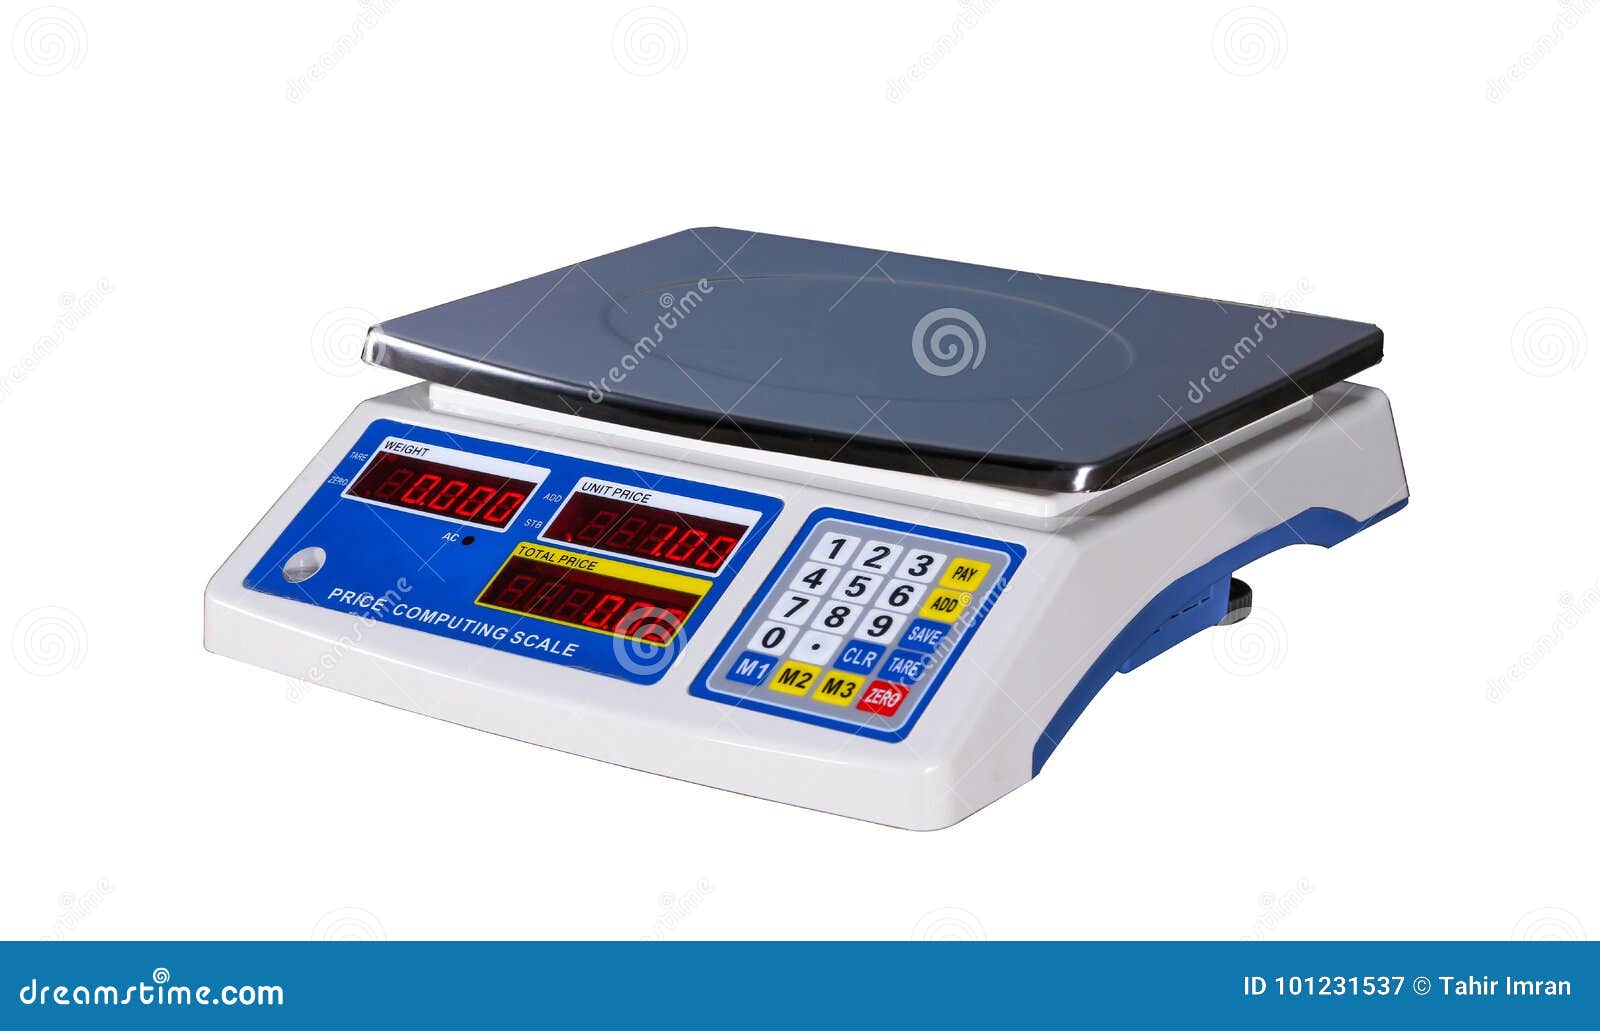 https://thumbs.dreamstime.com/z/weight-machine-scales-weighing-heavy-objects-goods-isolated-white-background-101231537.jpg